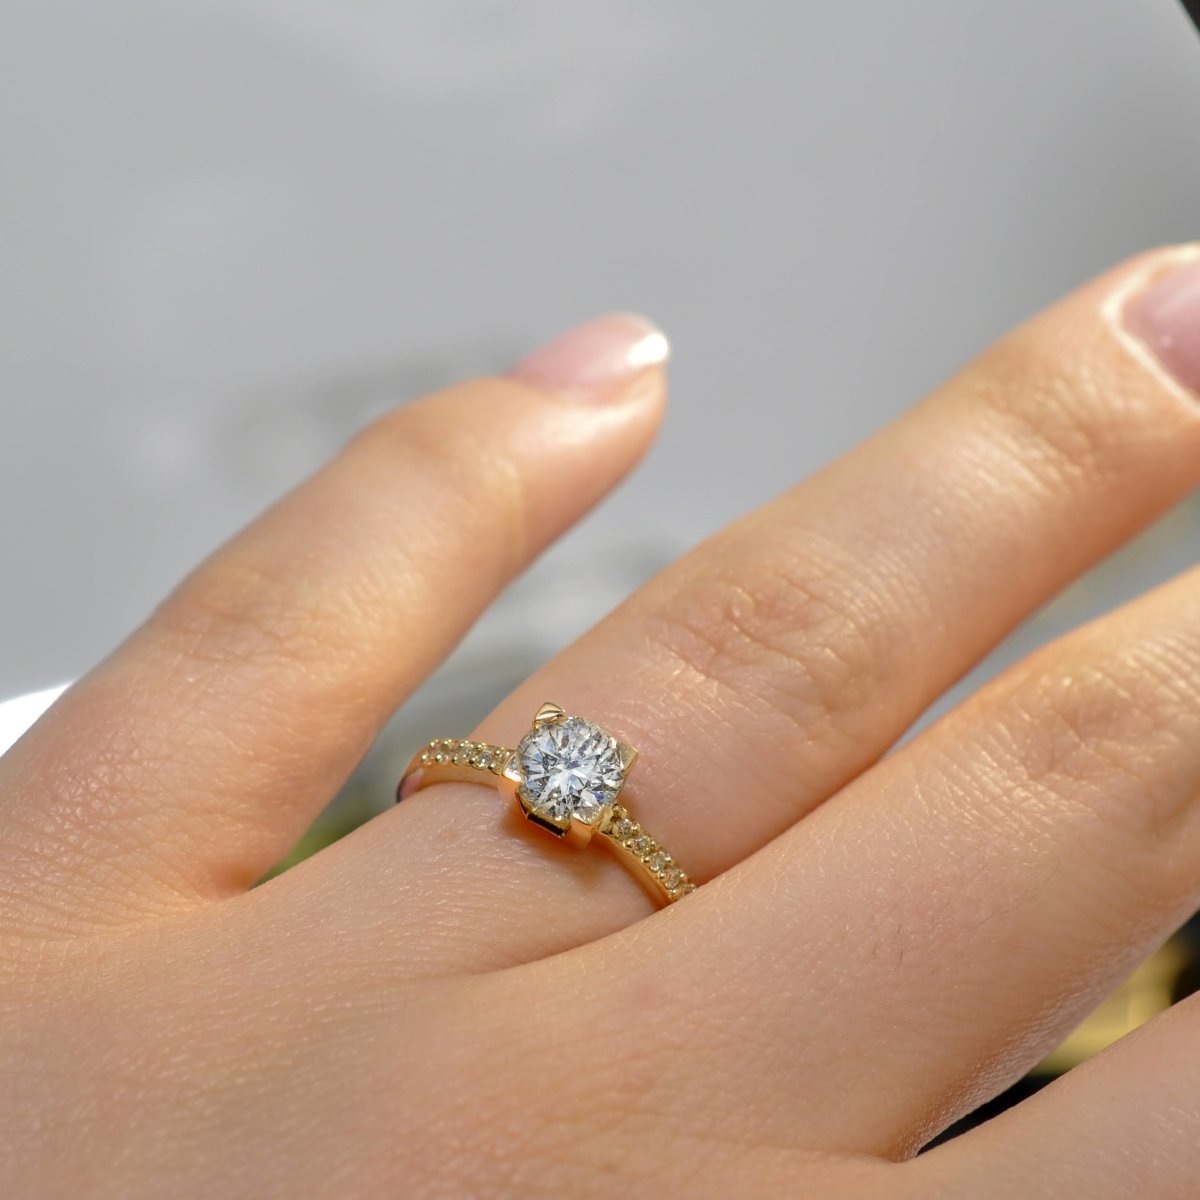 Inexpensive 0.90 CT Round Cut Diamond Engagement Ring in 14 KT Yellow Gold - Primestyle.com